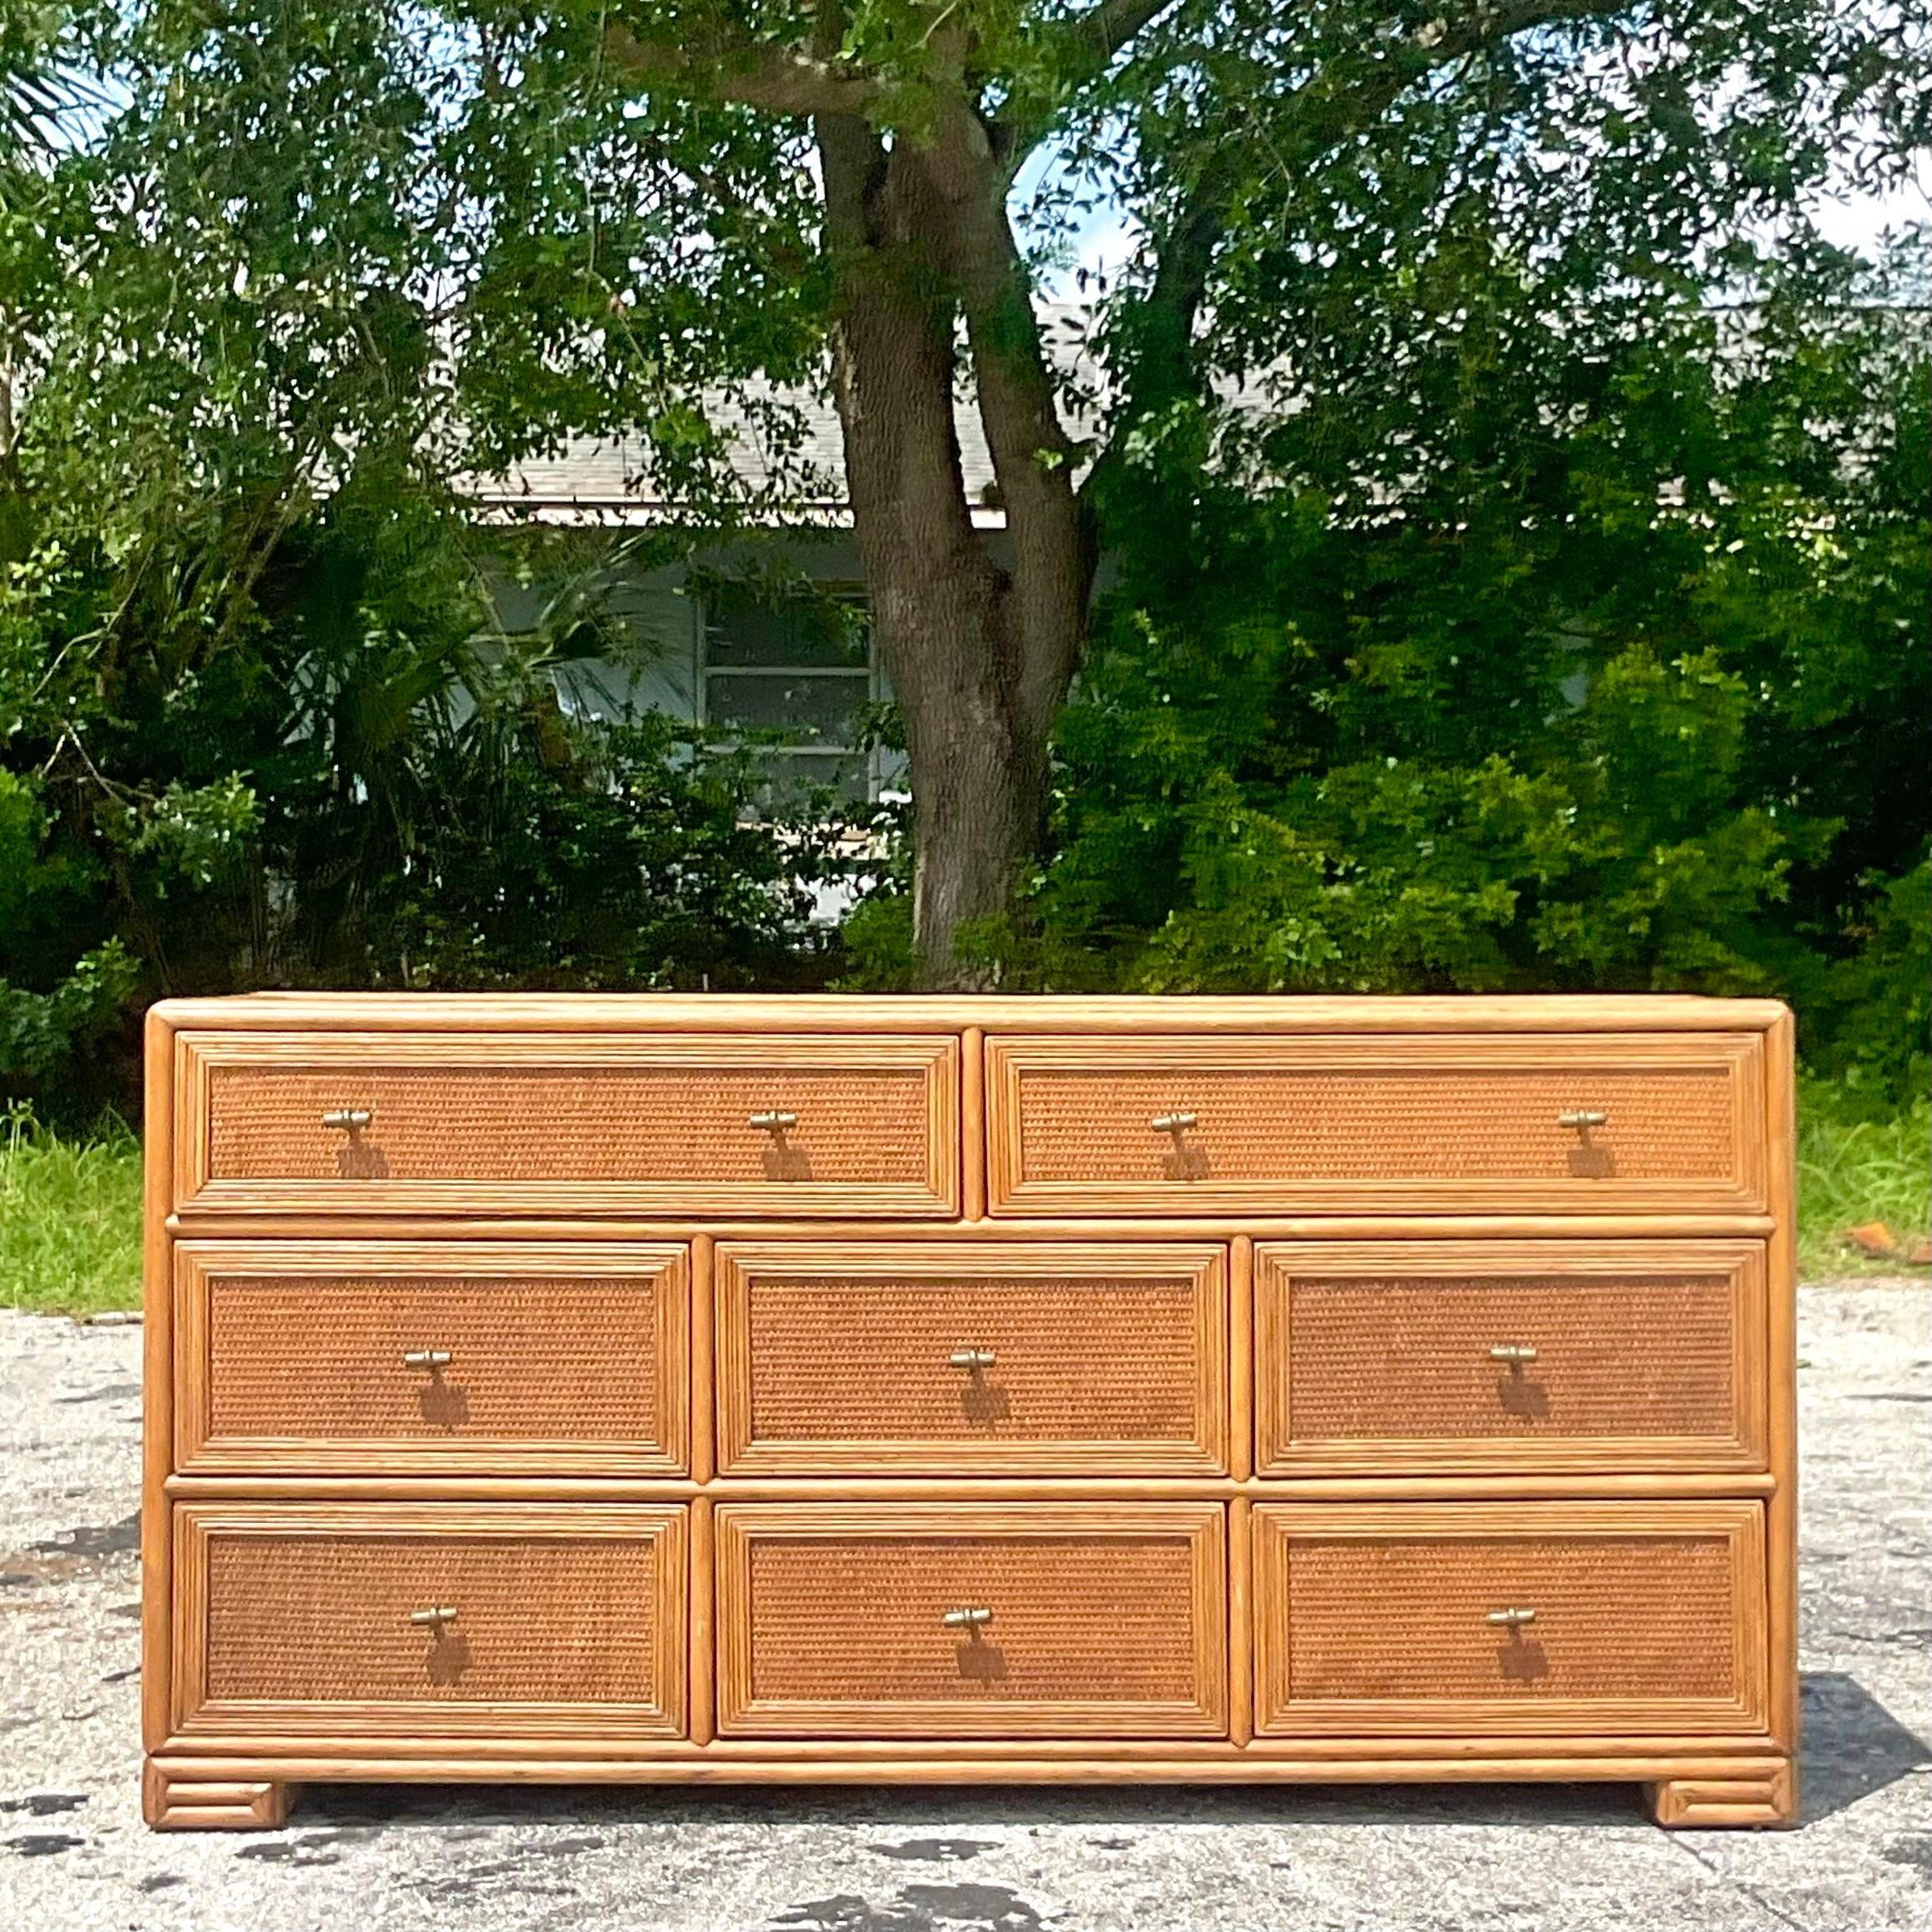 A fabulous vintage Coastal 8 drawer dresser. Made by the iconic Ficks Reed group and tagged in the drawer. Chic wood frame with inset woven rattan panels. Acquired from a Palm Beach estate.